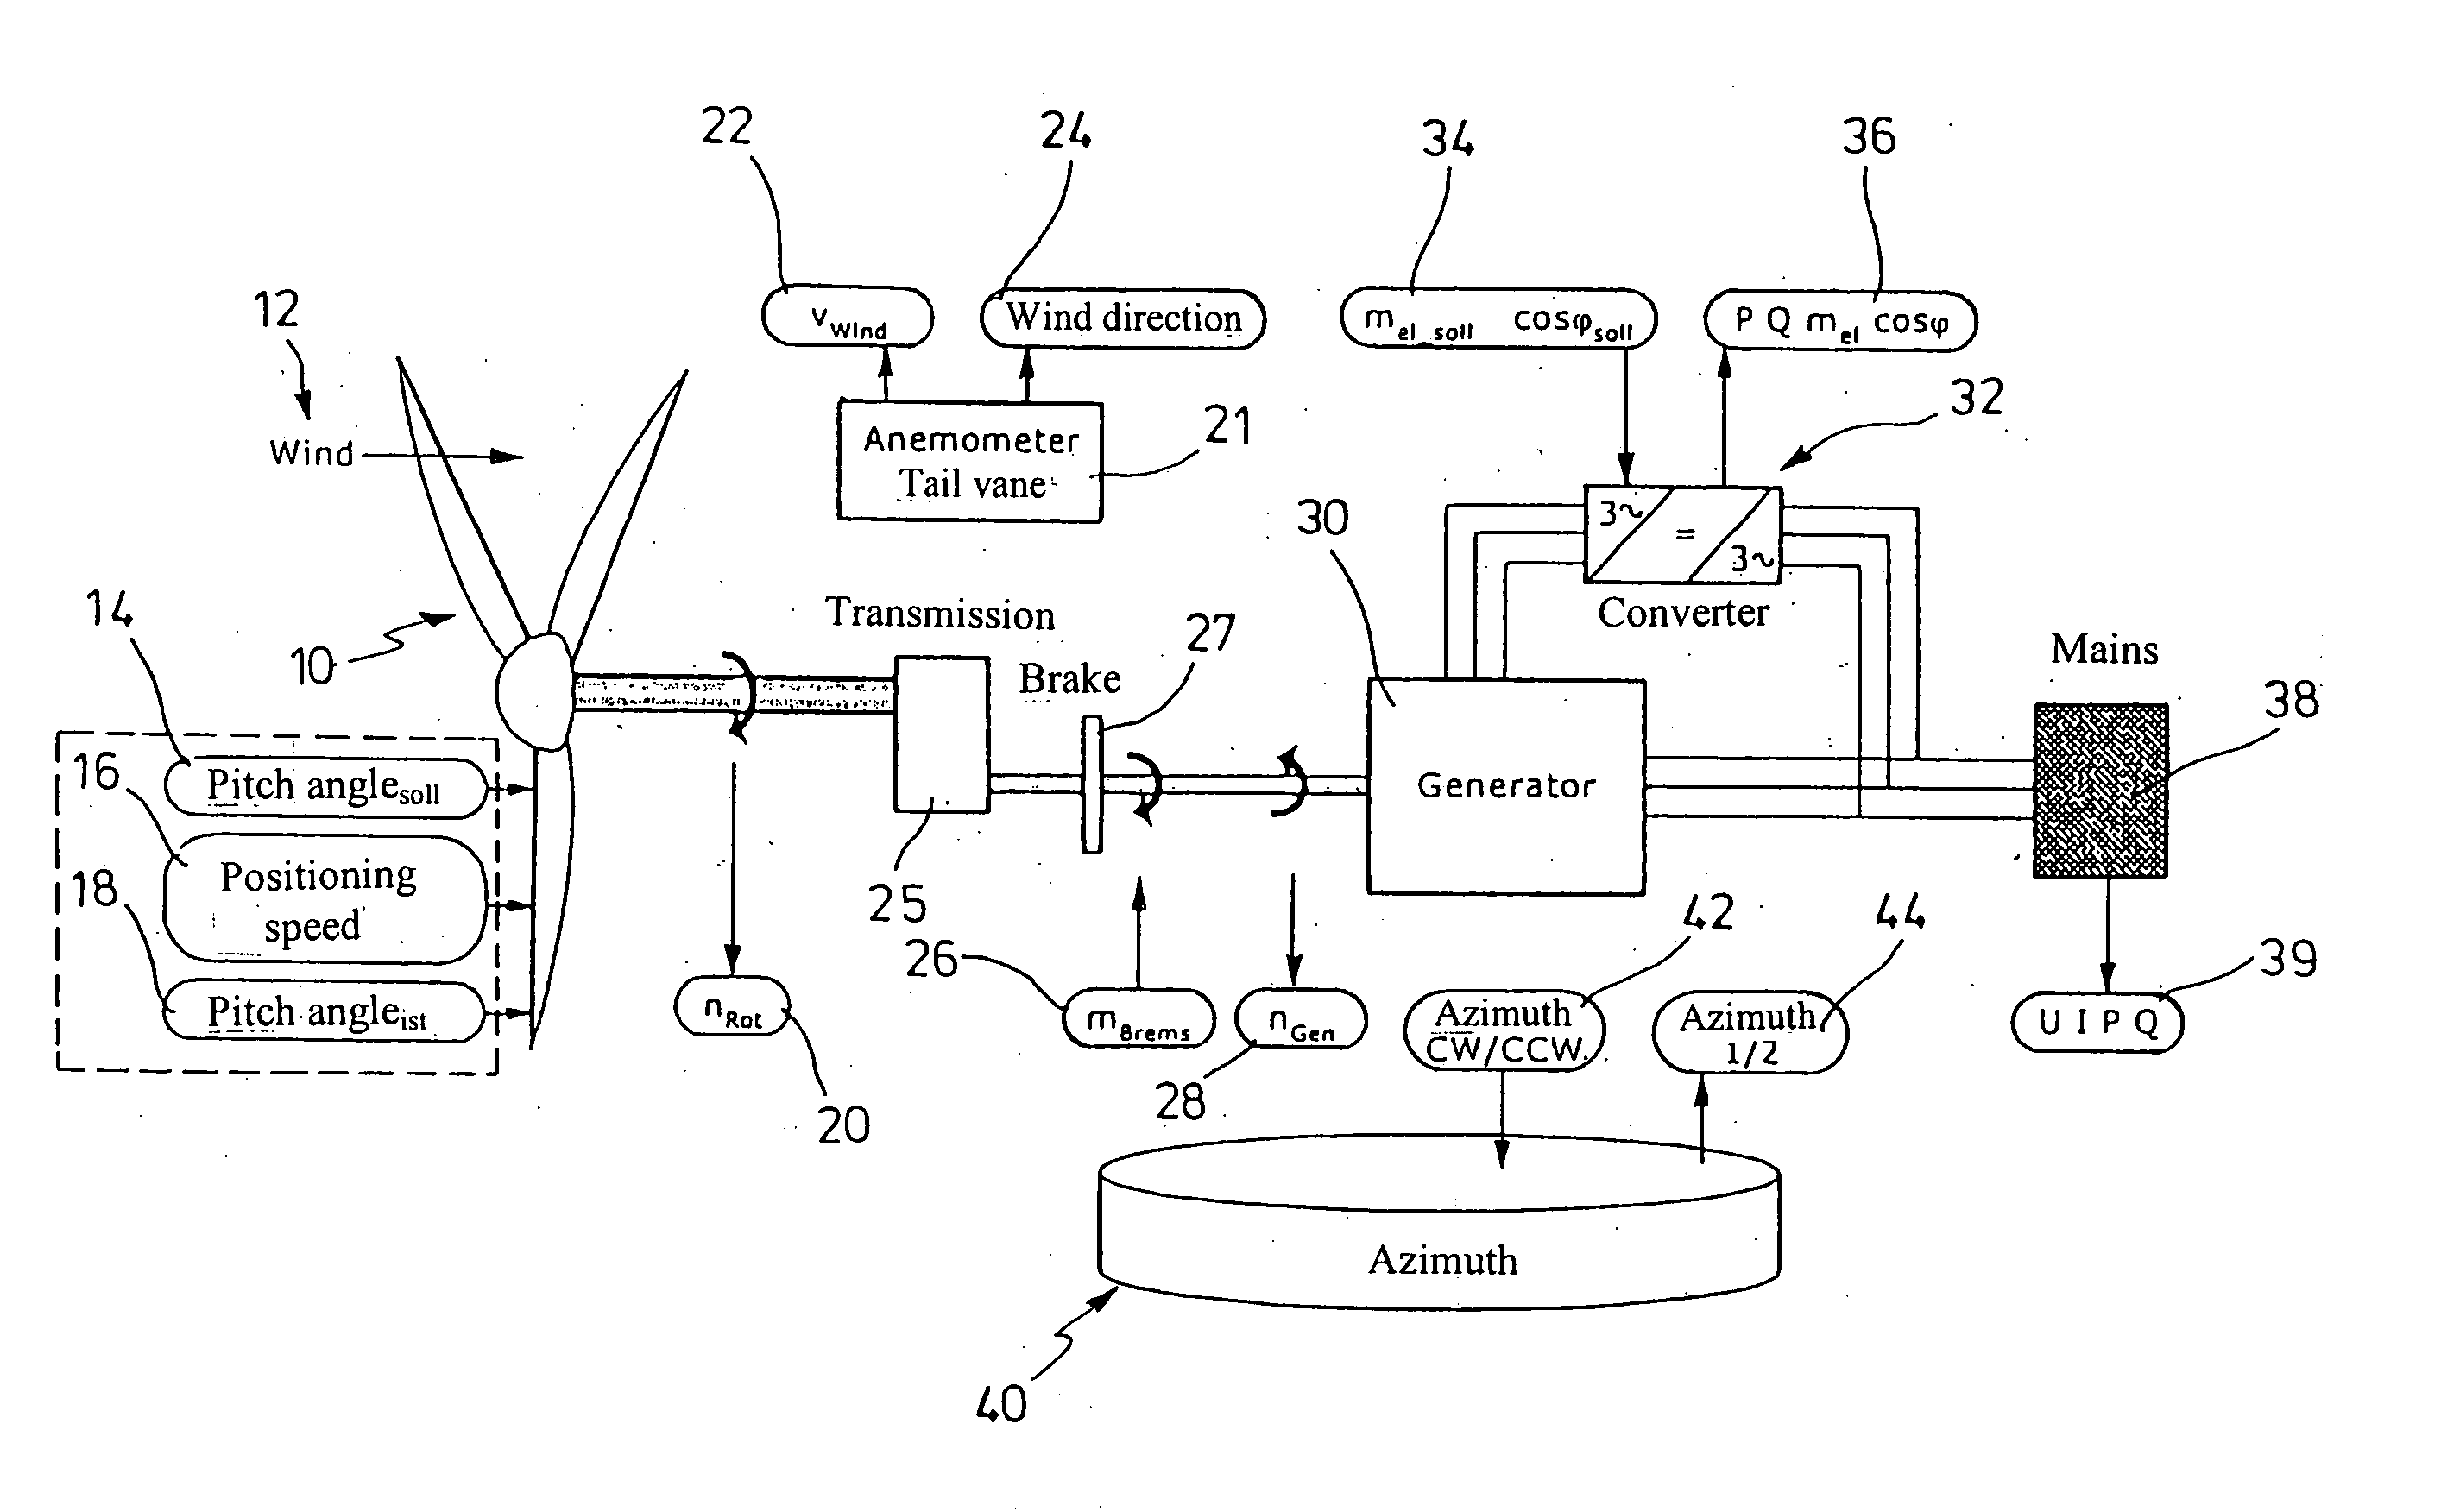 Device and method for a functional test of one wind turbine generator plant